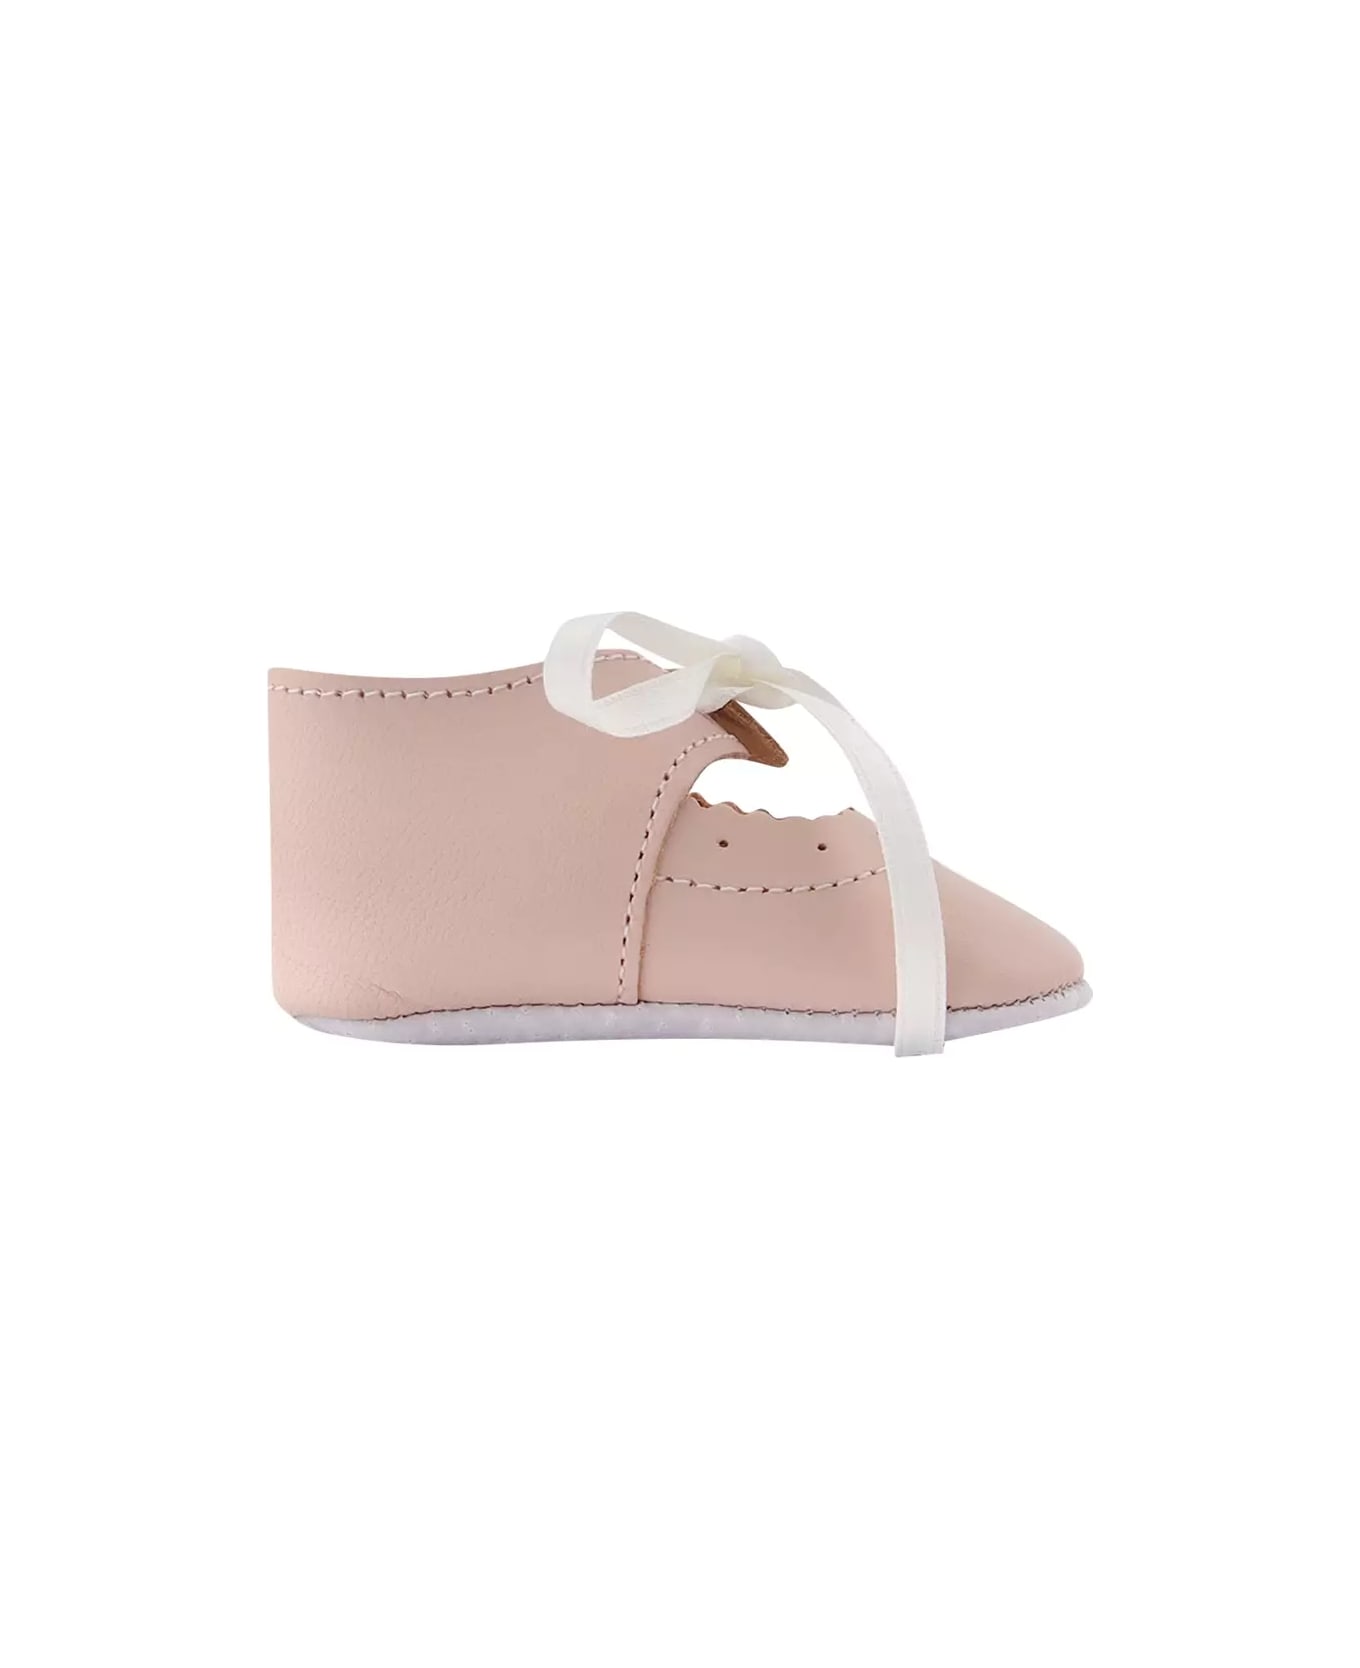 Tartine et Chocolat First Steps Shoes With Bow - Pink